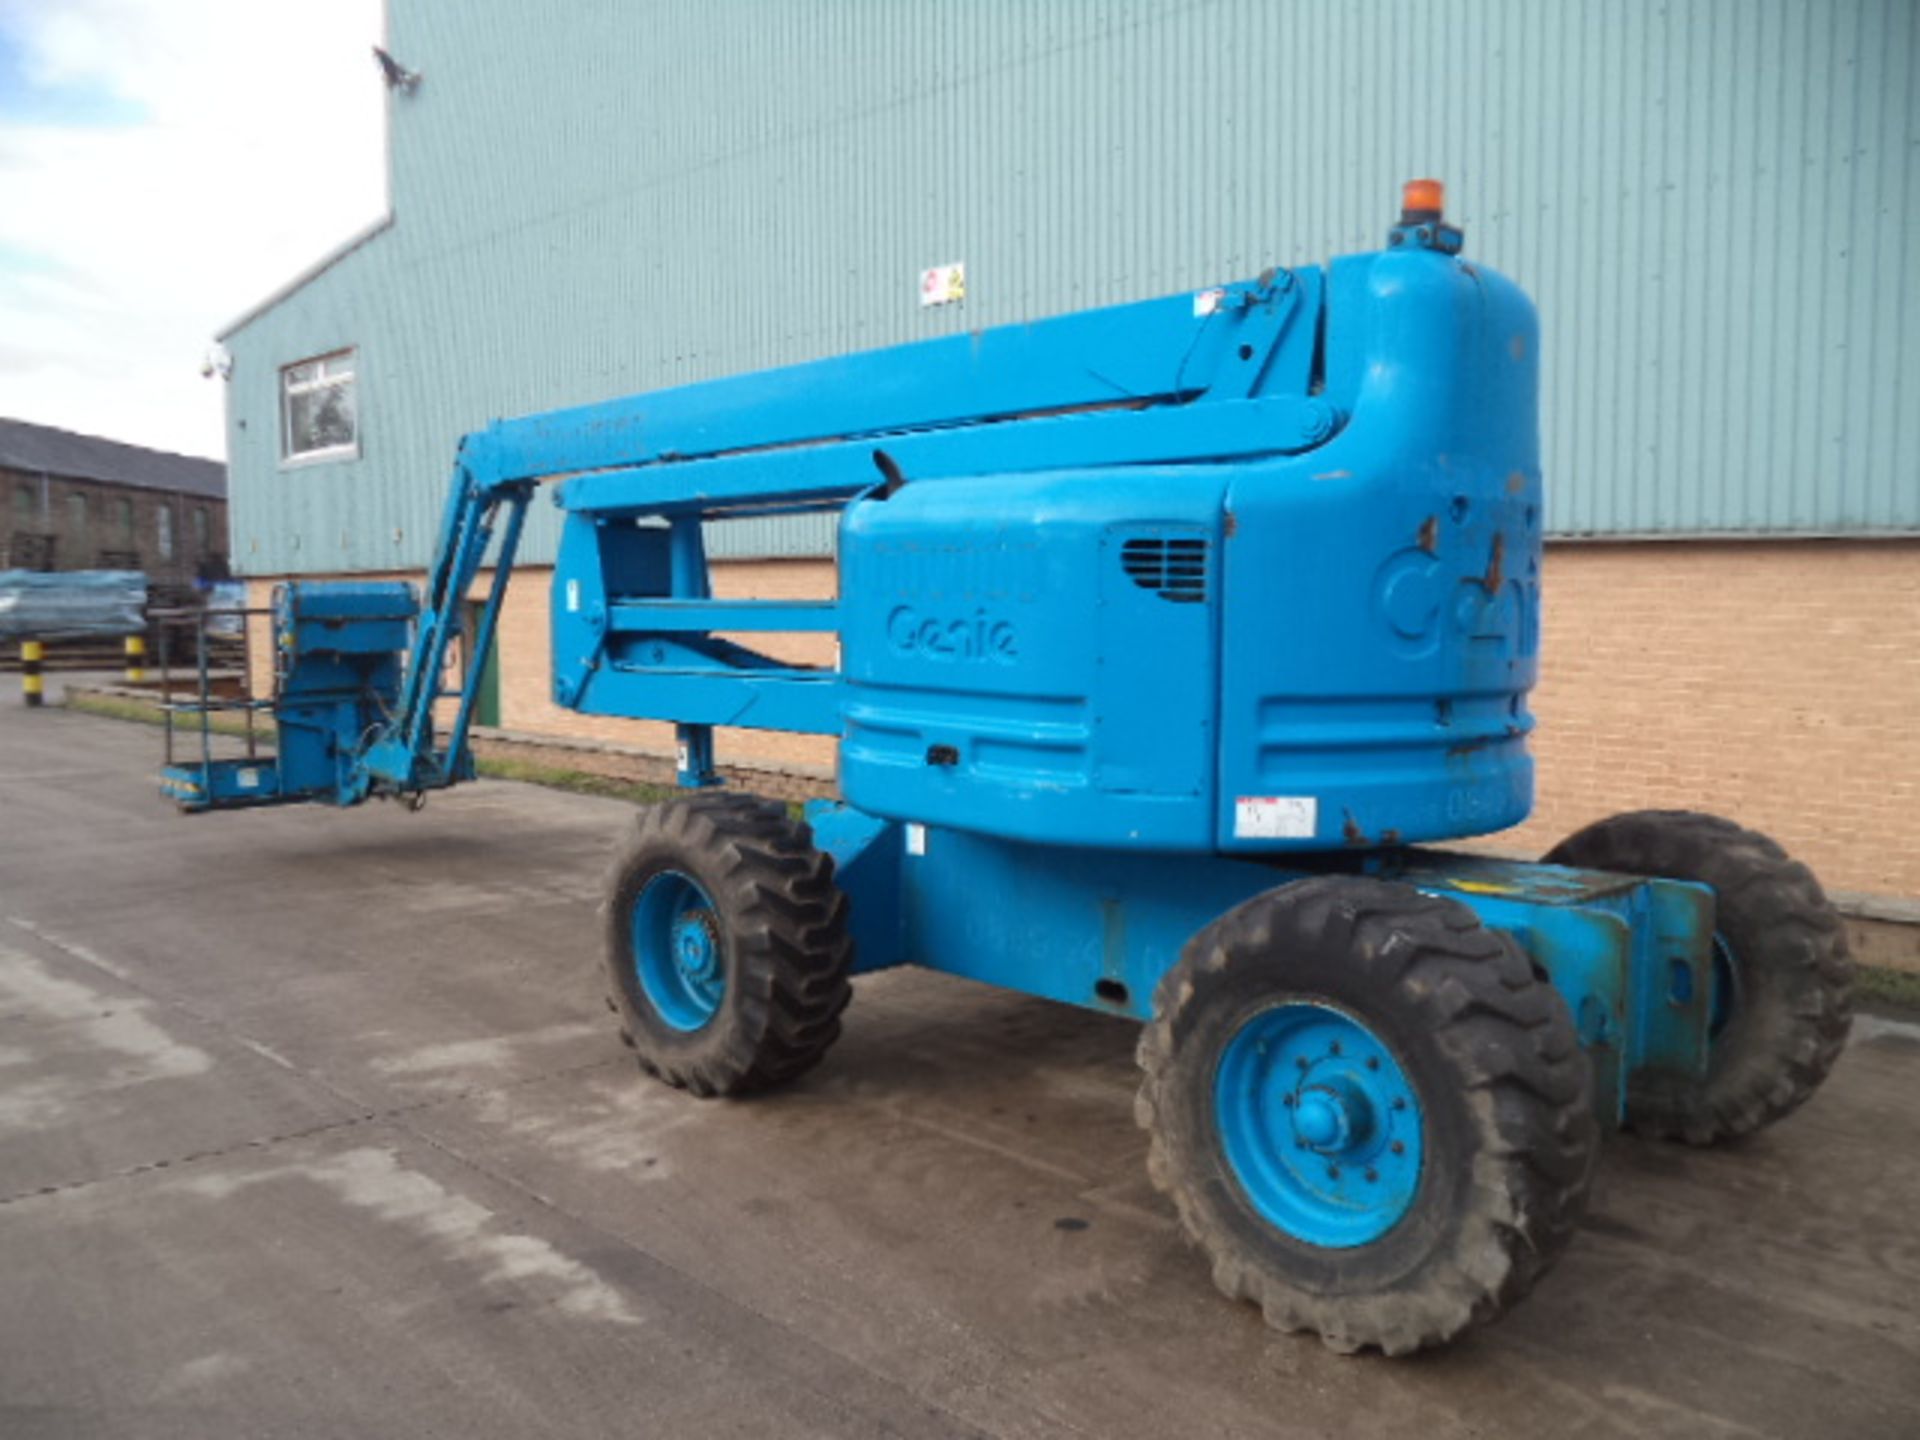 1999 GENIE Z60/34 2wd articulated boom lift S/n: 1986 (Runs, Drives, Lifts) - Image 2 of 7